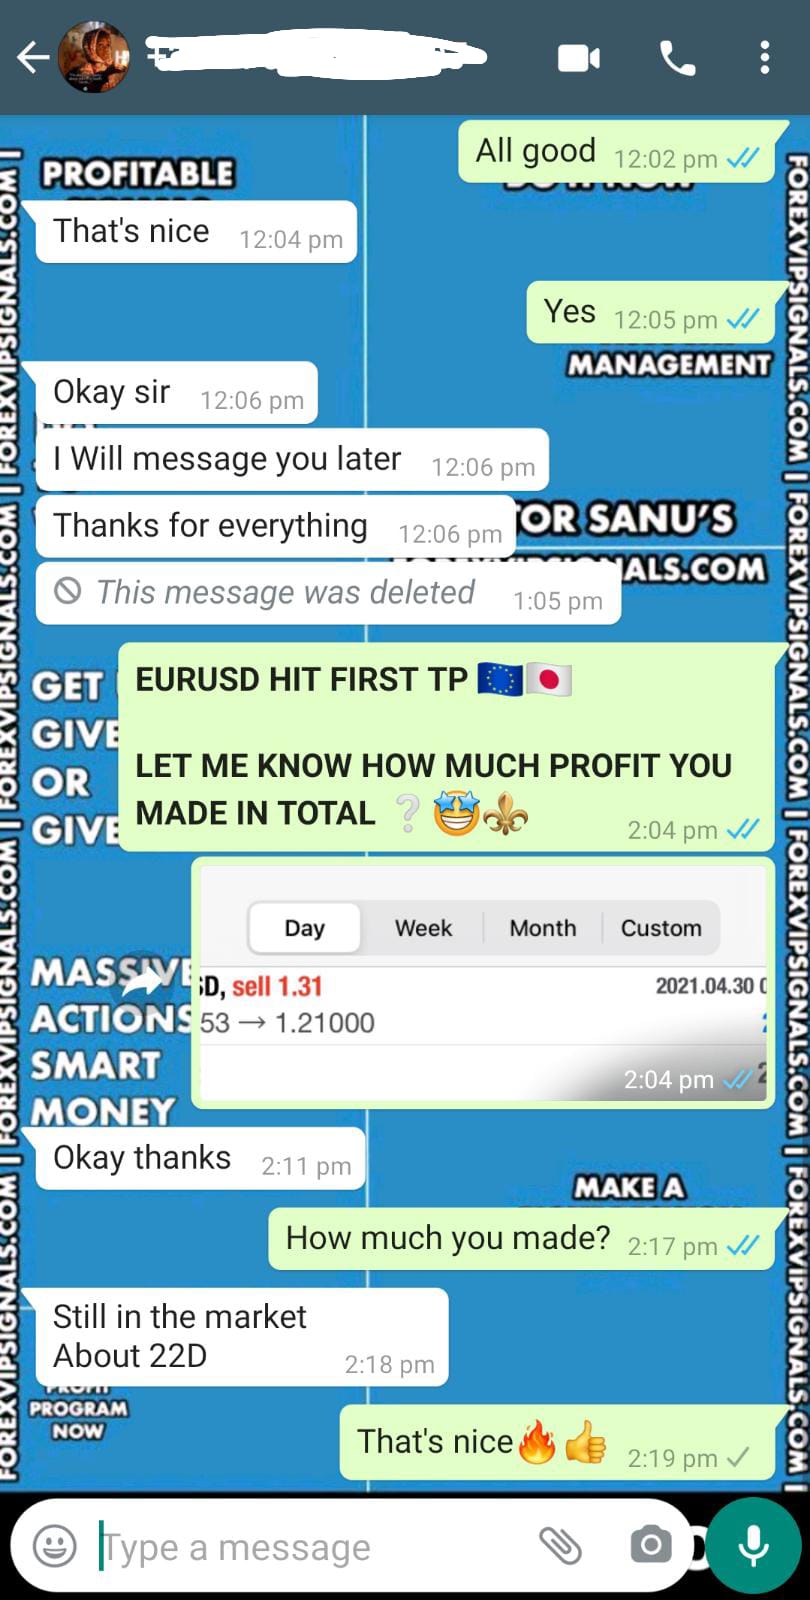 accurate forex signals free with forex vip signals